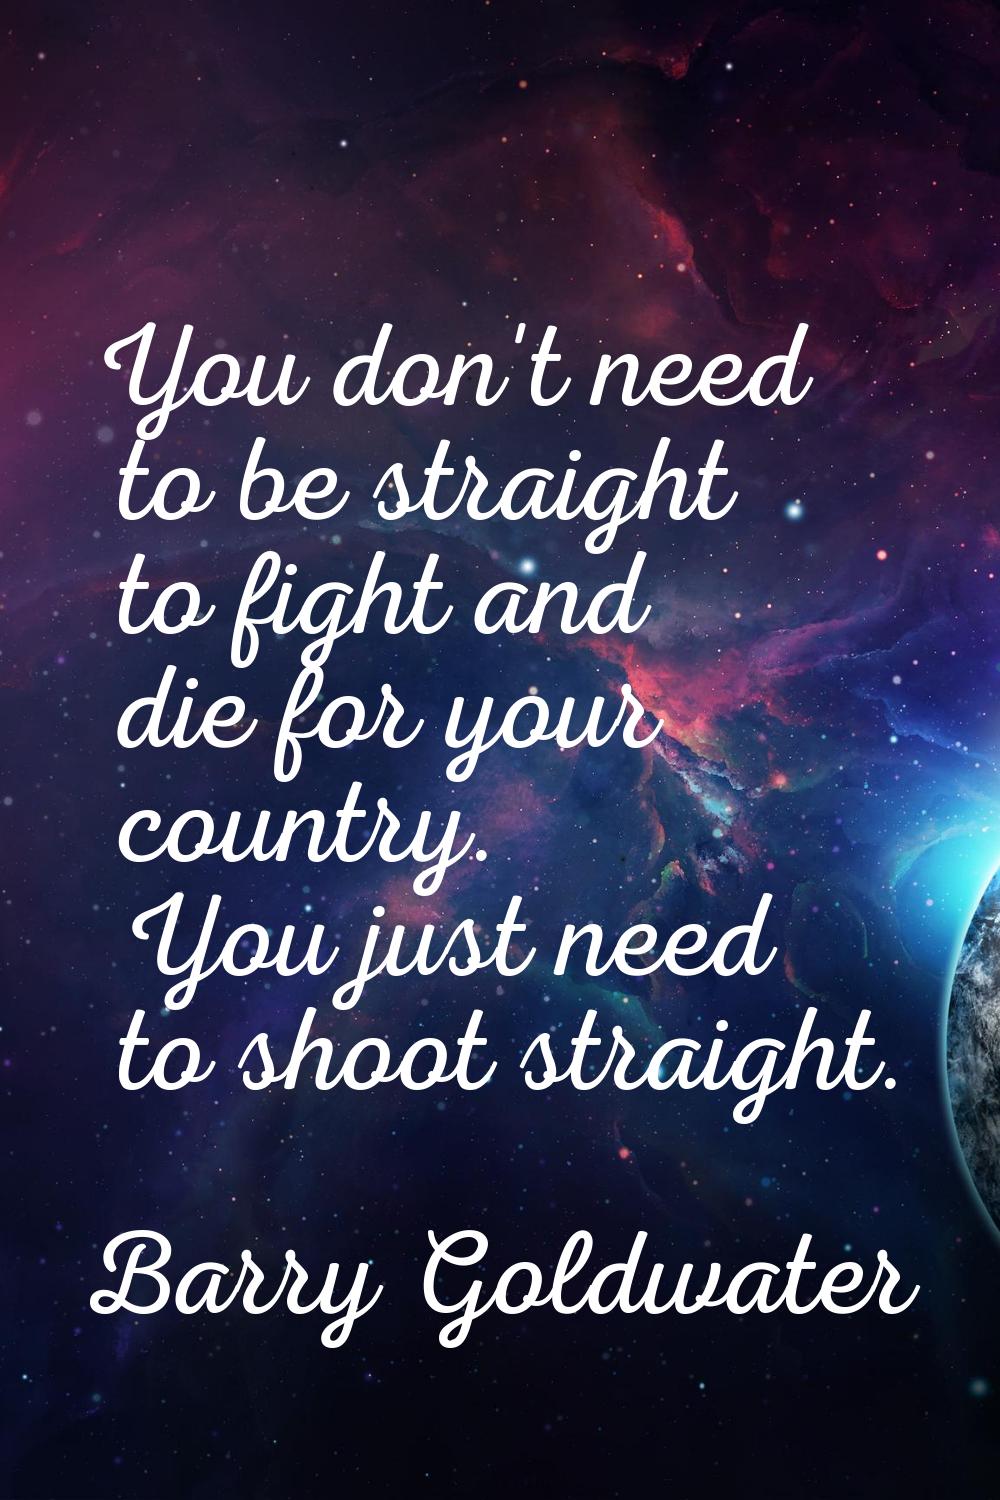 You don't need to be straight to fight and die for your country. You just need to shoot straight.